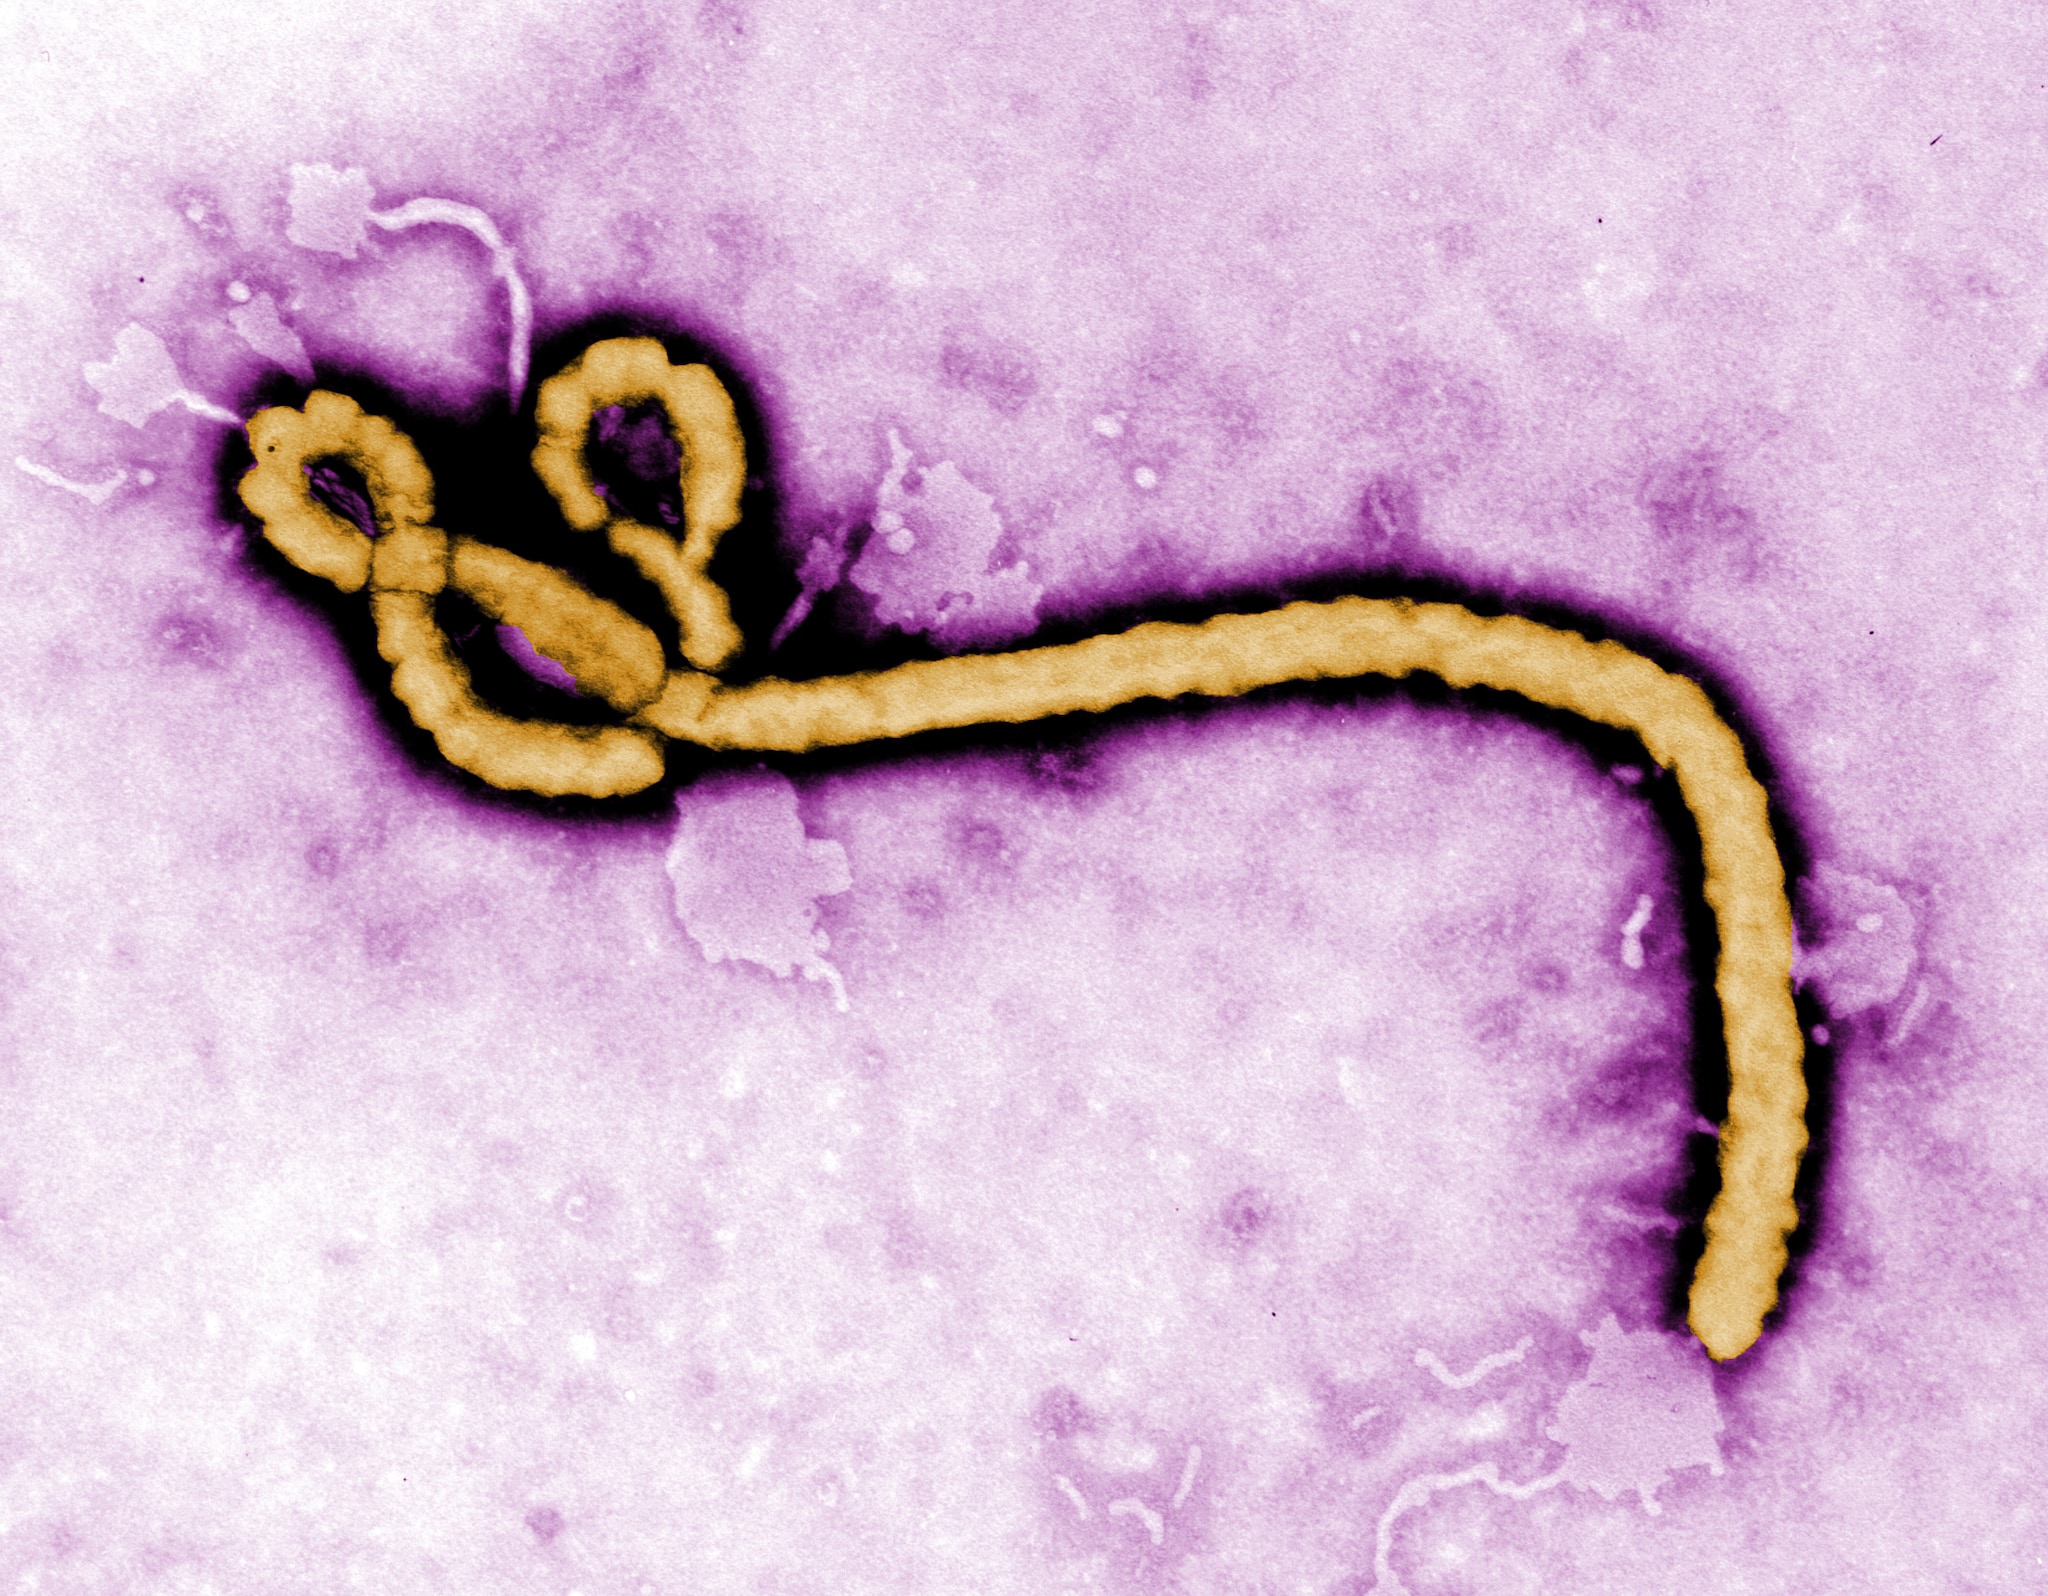 View of Ebola Virus under a microscope